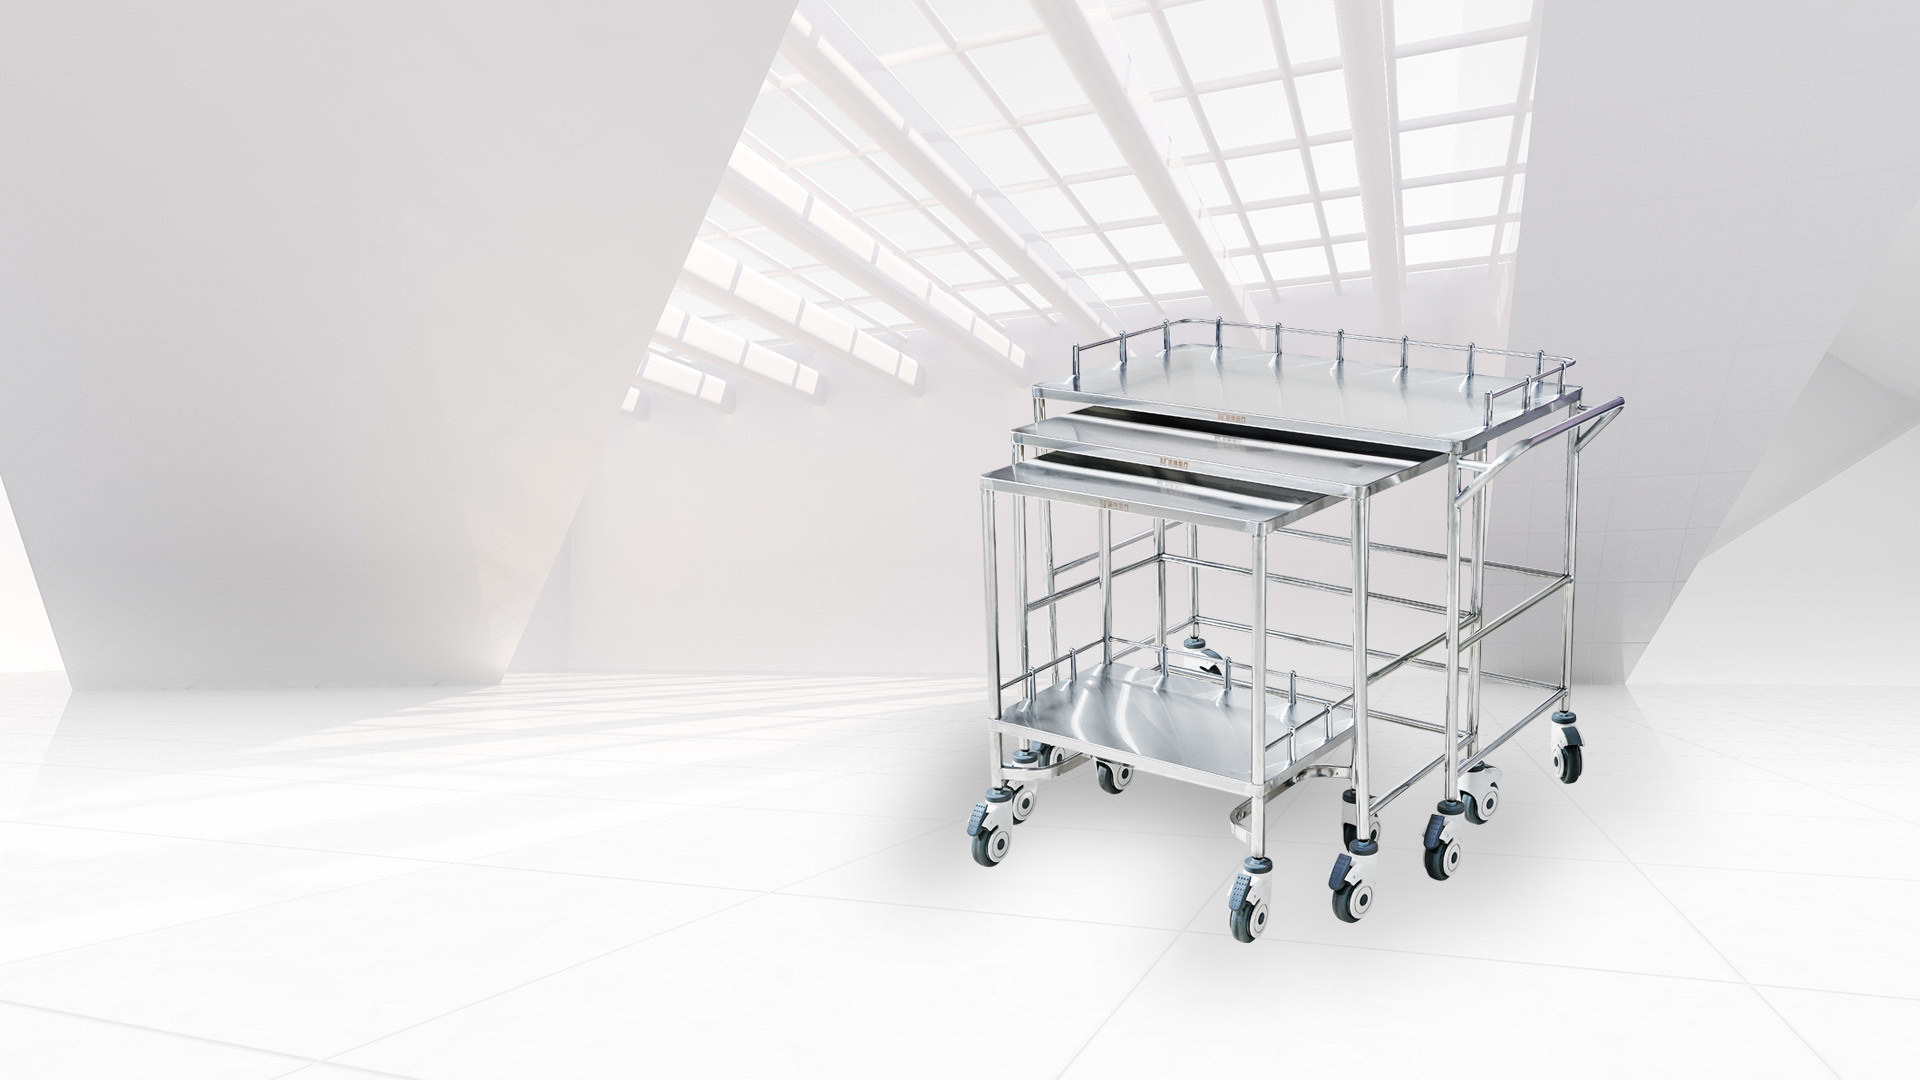 Stainless steel medical vehicles, platforms and cabinets